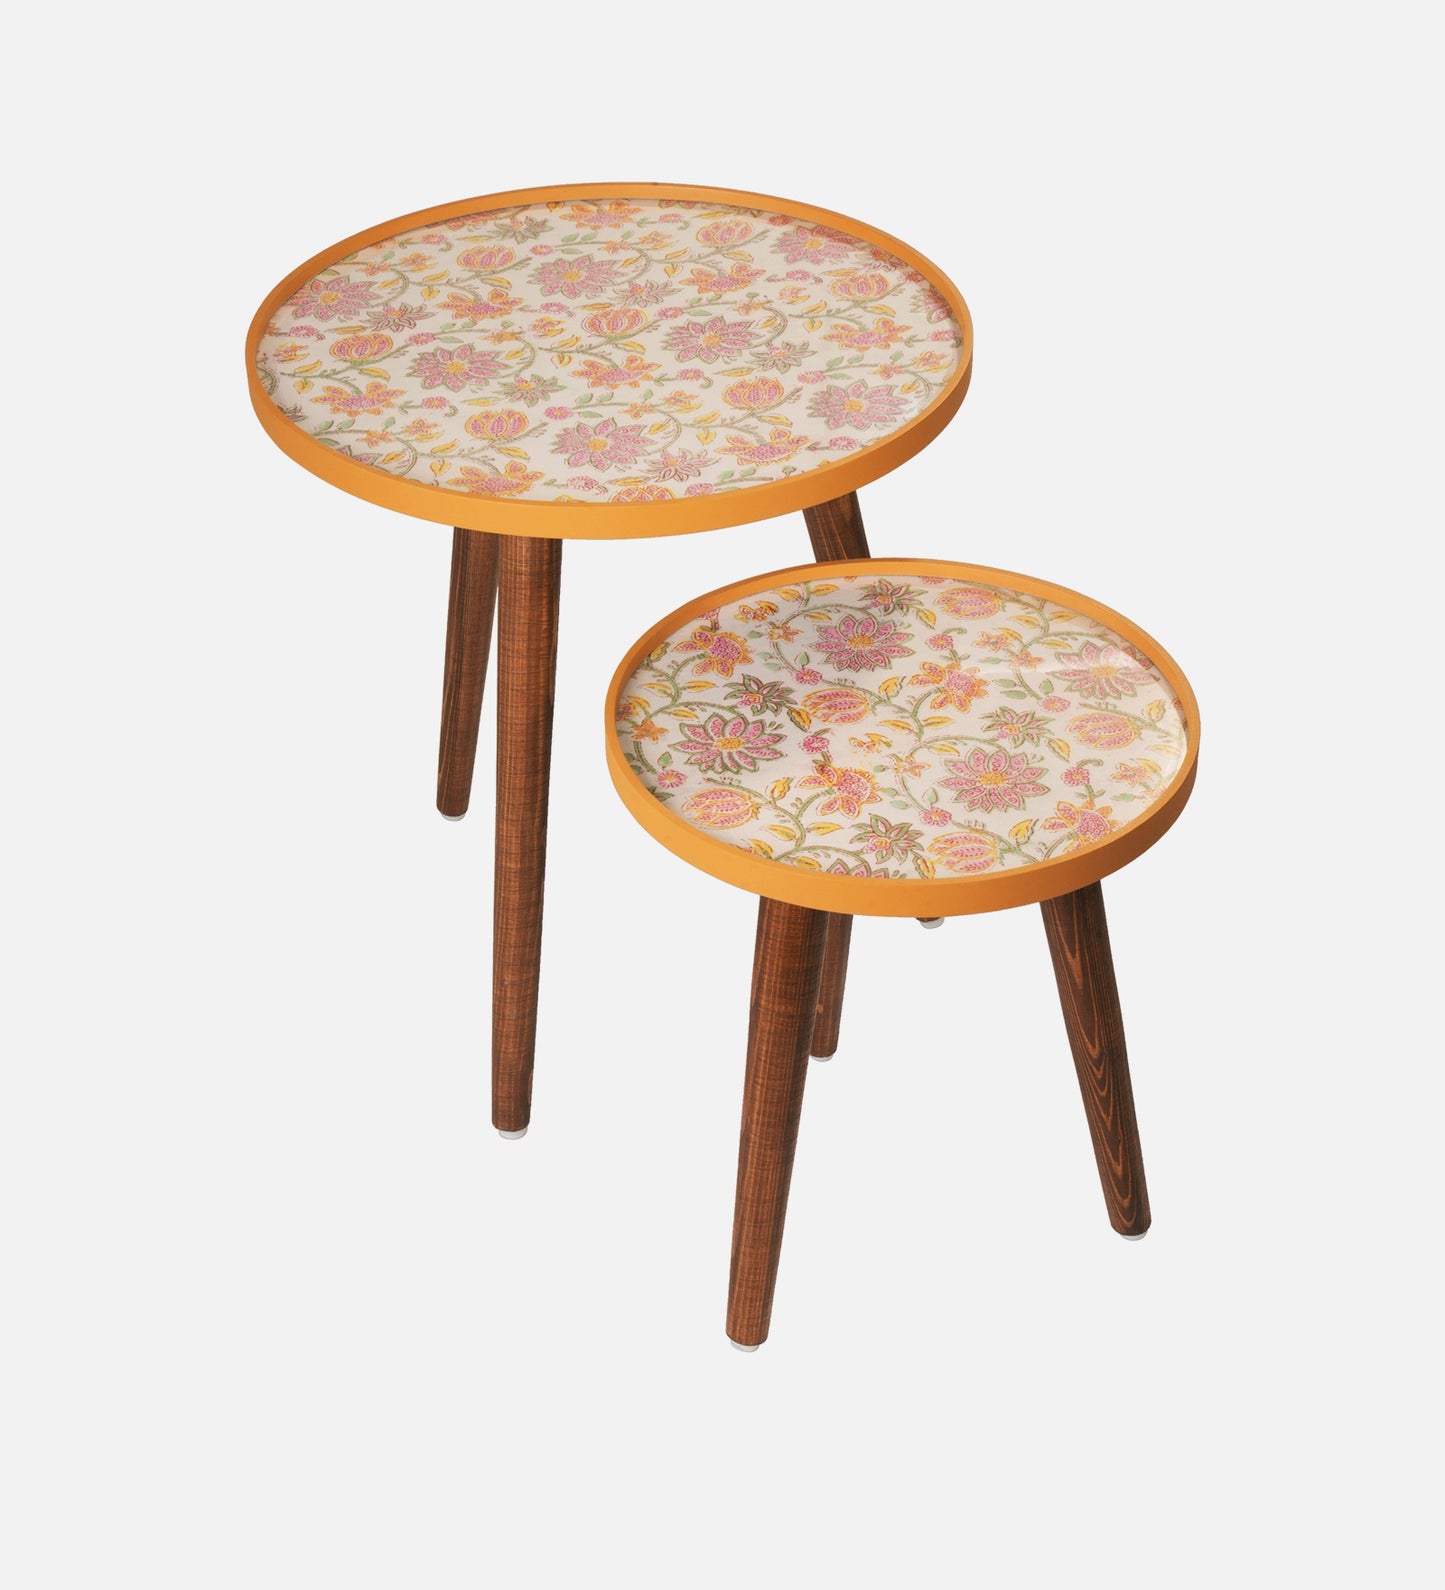 Pink and Yellow Floral Round Nesting Tables with Wooden Legs, Side Tables, Wooden Tables, Living Room Decor by A Tiny Mistake